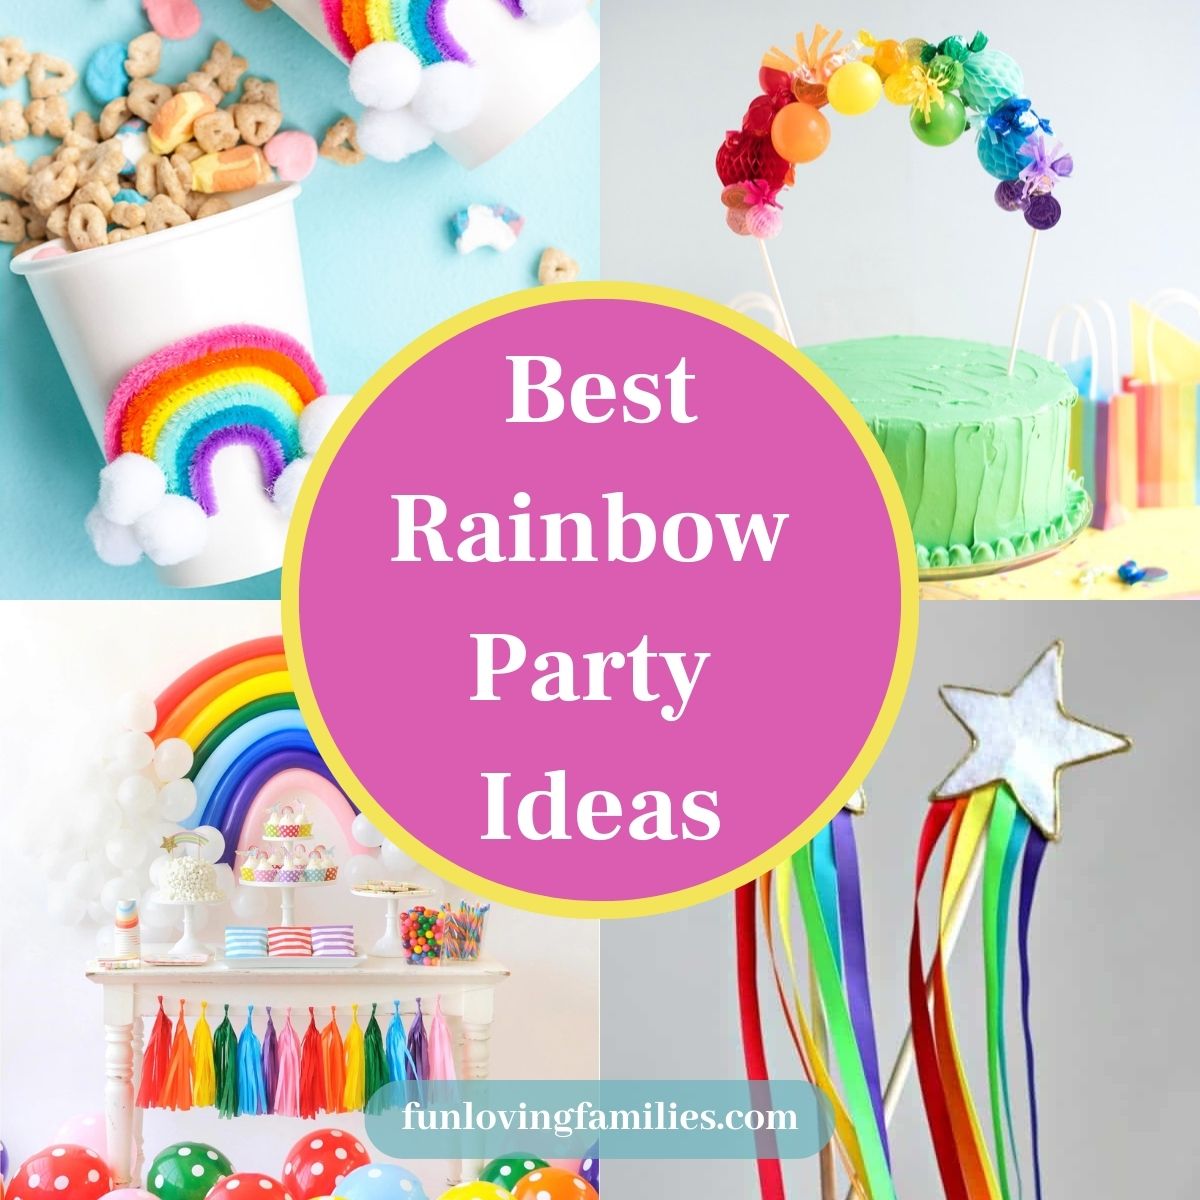 Rainbow Party Ideas That Will Knock Your Socks Off